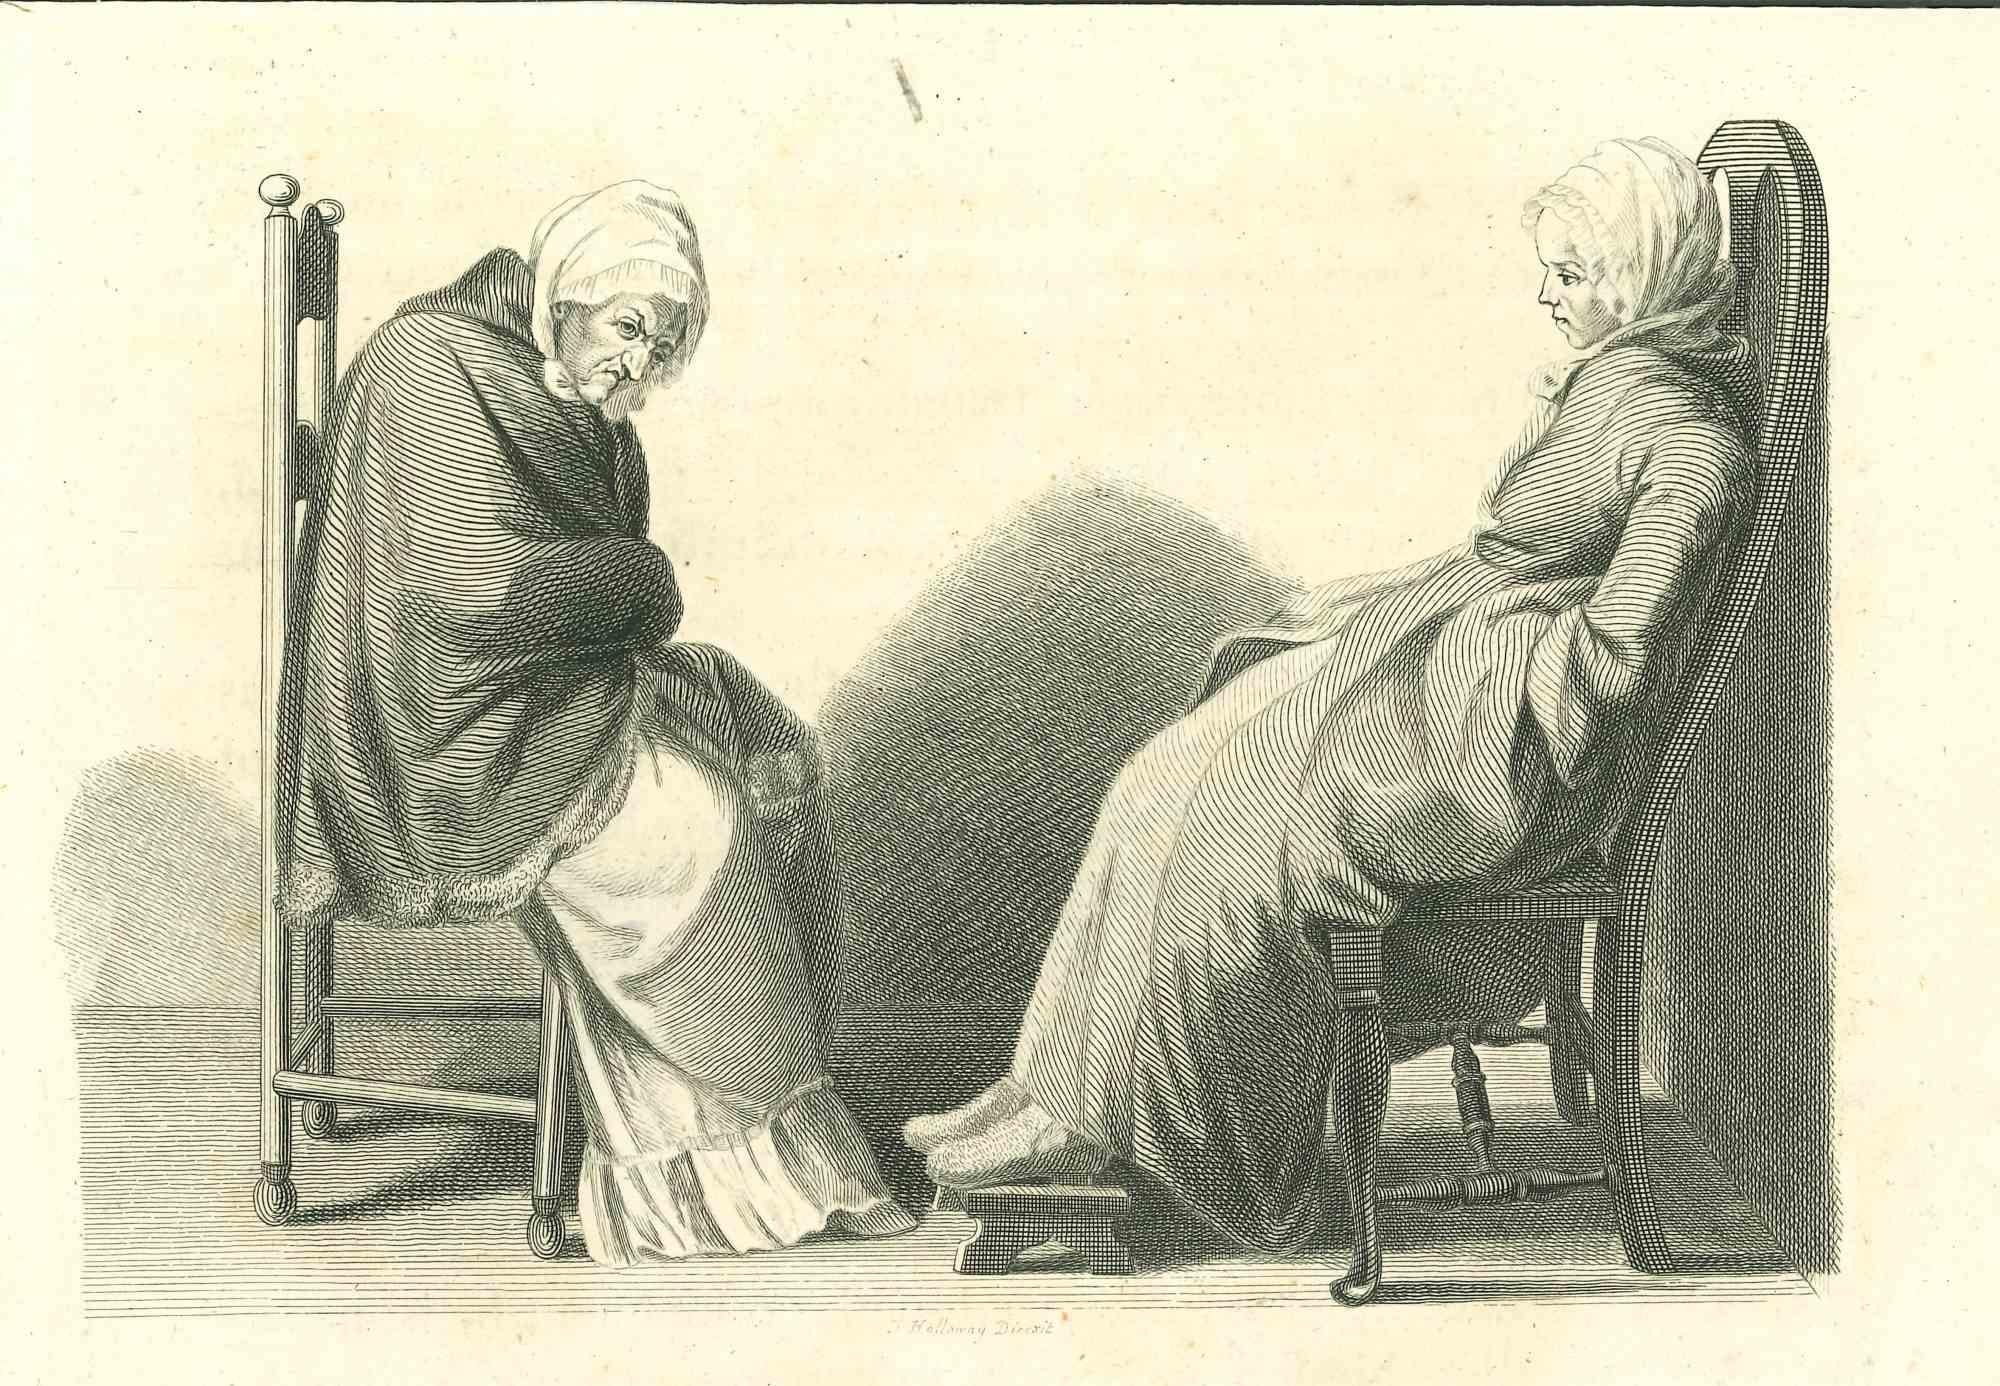 Figures is an original artwork realized by Thomas Holloway for Johann Caspar Lavater's  "Essays on Physiognomy, Designed to promote the Knowledge and the Love of Mankind", London, Bensley, 1810. 

This artwork portrays two women. On the back of this